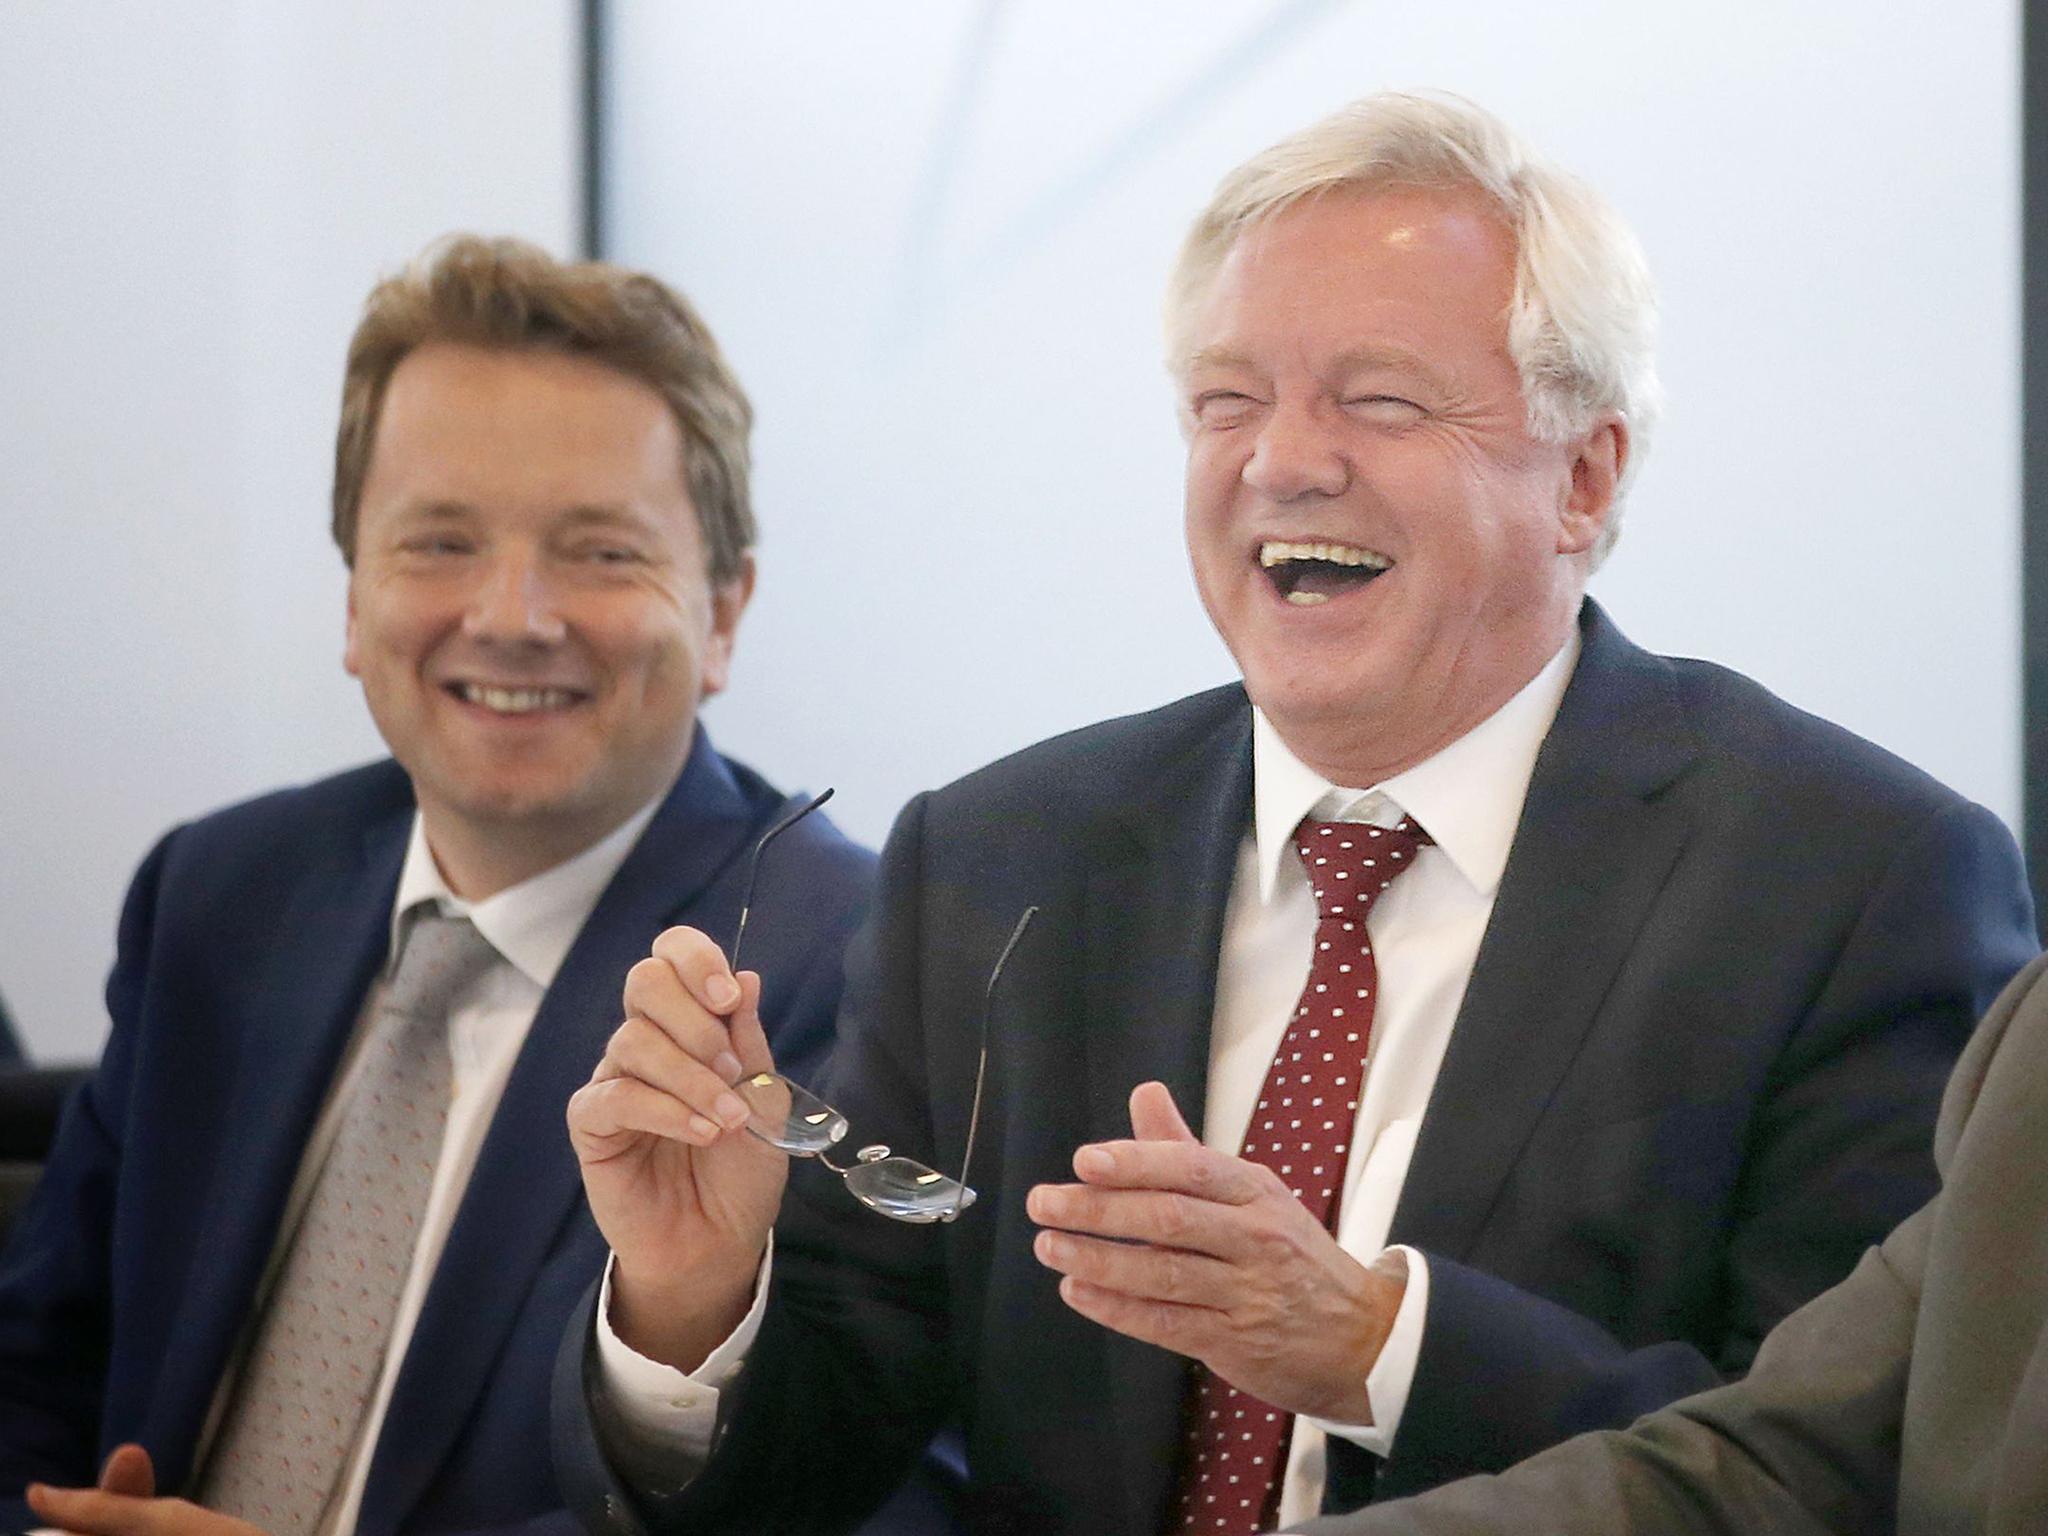 David Davis&apos;s former chief of staff to launch new political party to &apos;reverse Brexit with no second referendum&apos;